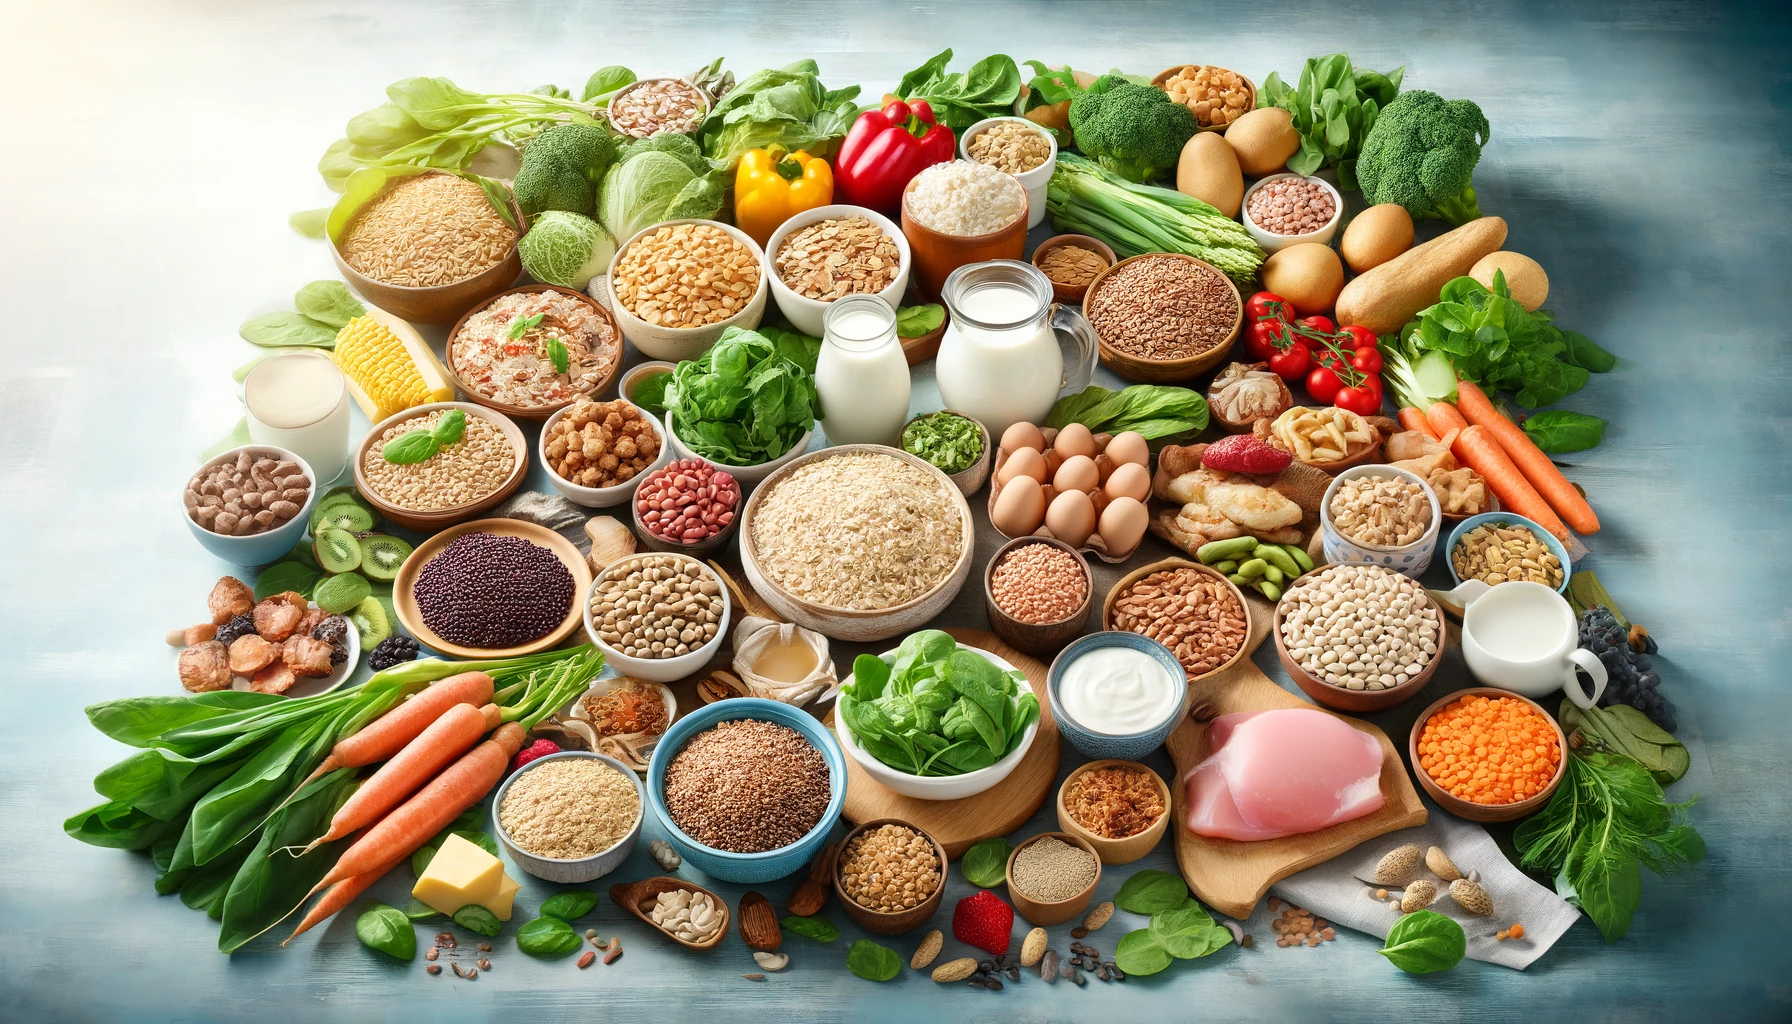 A detailed and colorful kitchen table spread showcasing a variety of foods rich in Vitamin B1 and B2. The table includes whole grains like brown rice